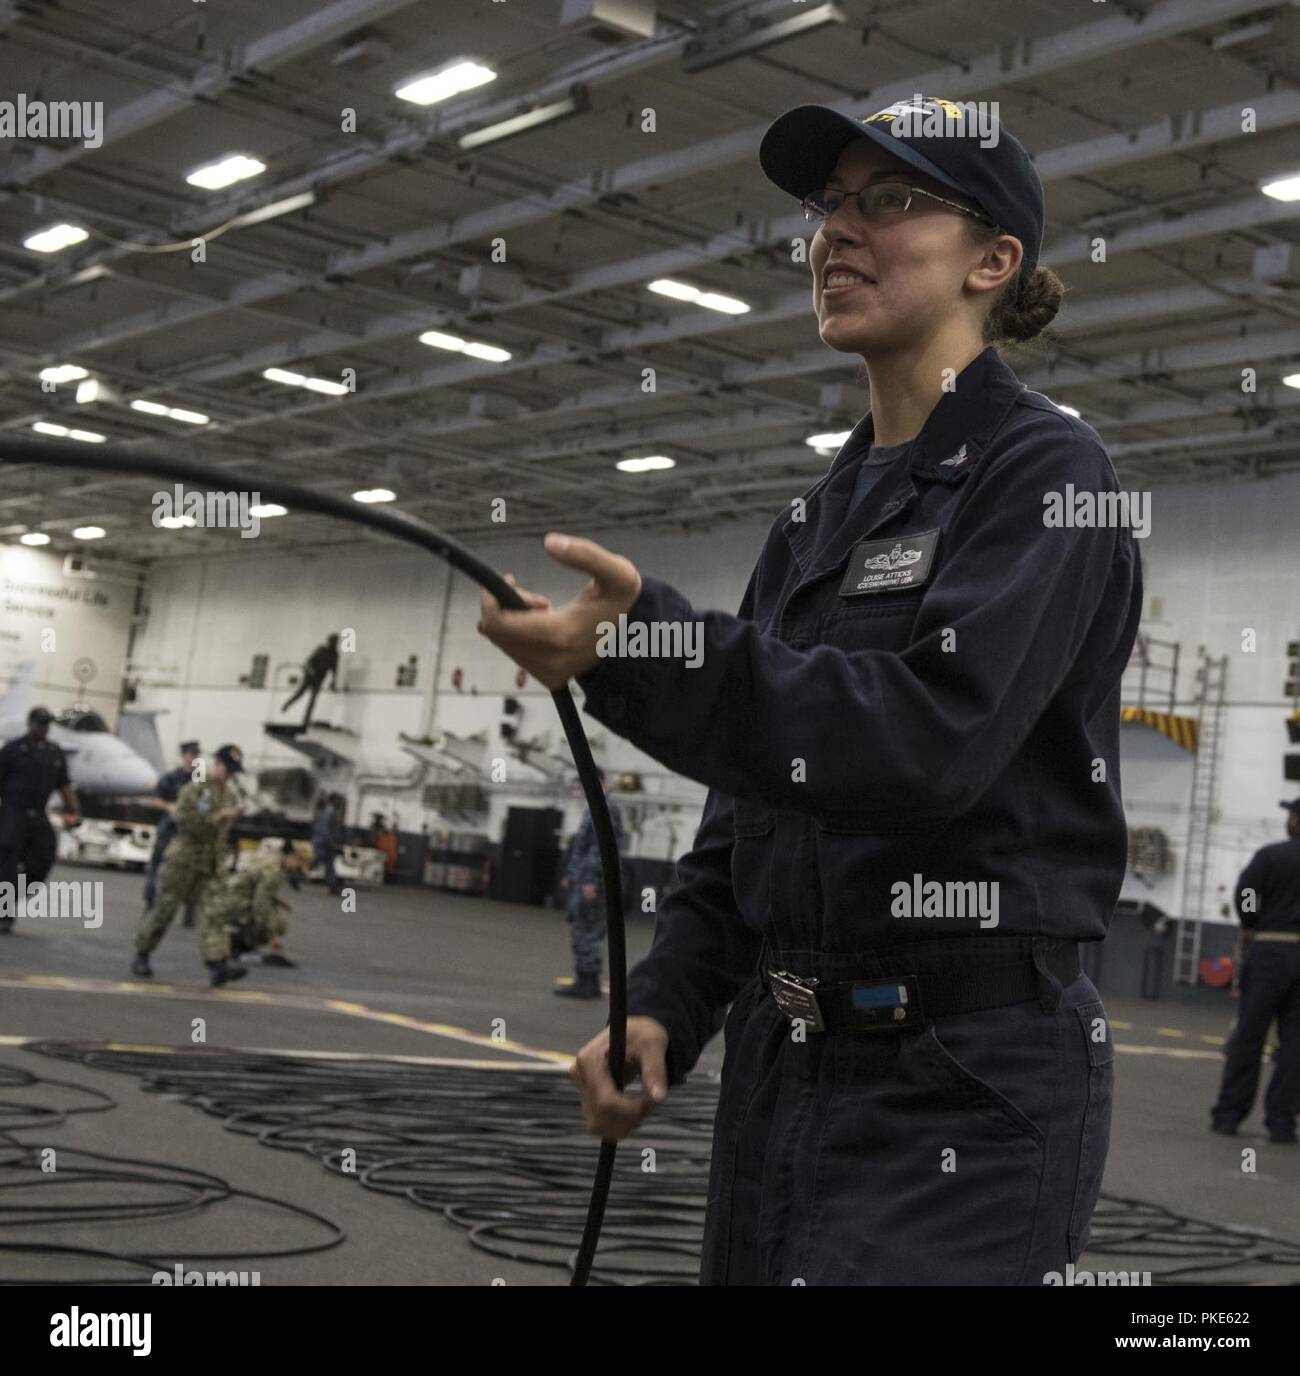 NORFOLK, Va. (July 25, 2018) Interior Communications Electrician 3rd Class Louise Atticks, from Harrisburg, Pennsylvania, coils plain old telephone system (POTS) lines during cleaning stations aboard the aircraft carrier USS George H.W. Bush (CVN 77). The ship is in port in Norfolk, Virginia, conducting routine training exercises to maintain carrier readiness. Stock Photo